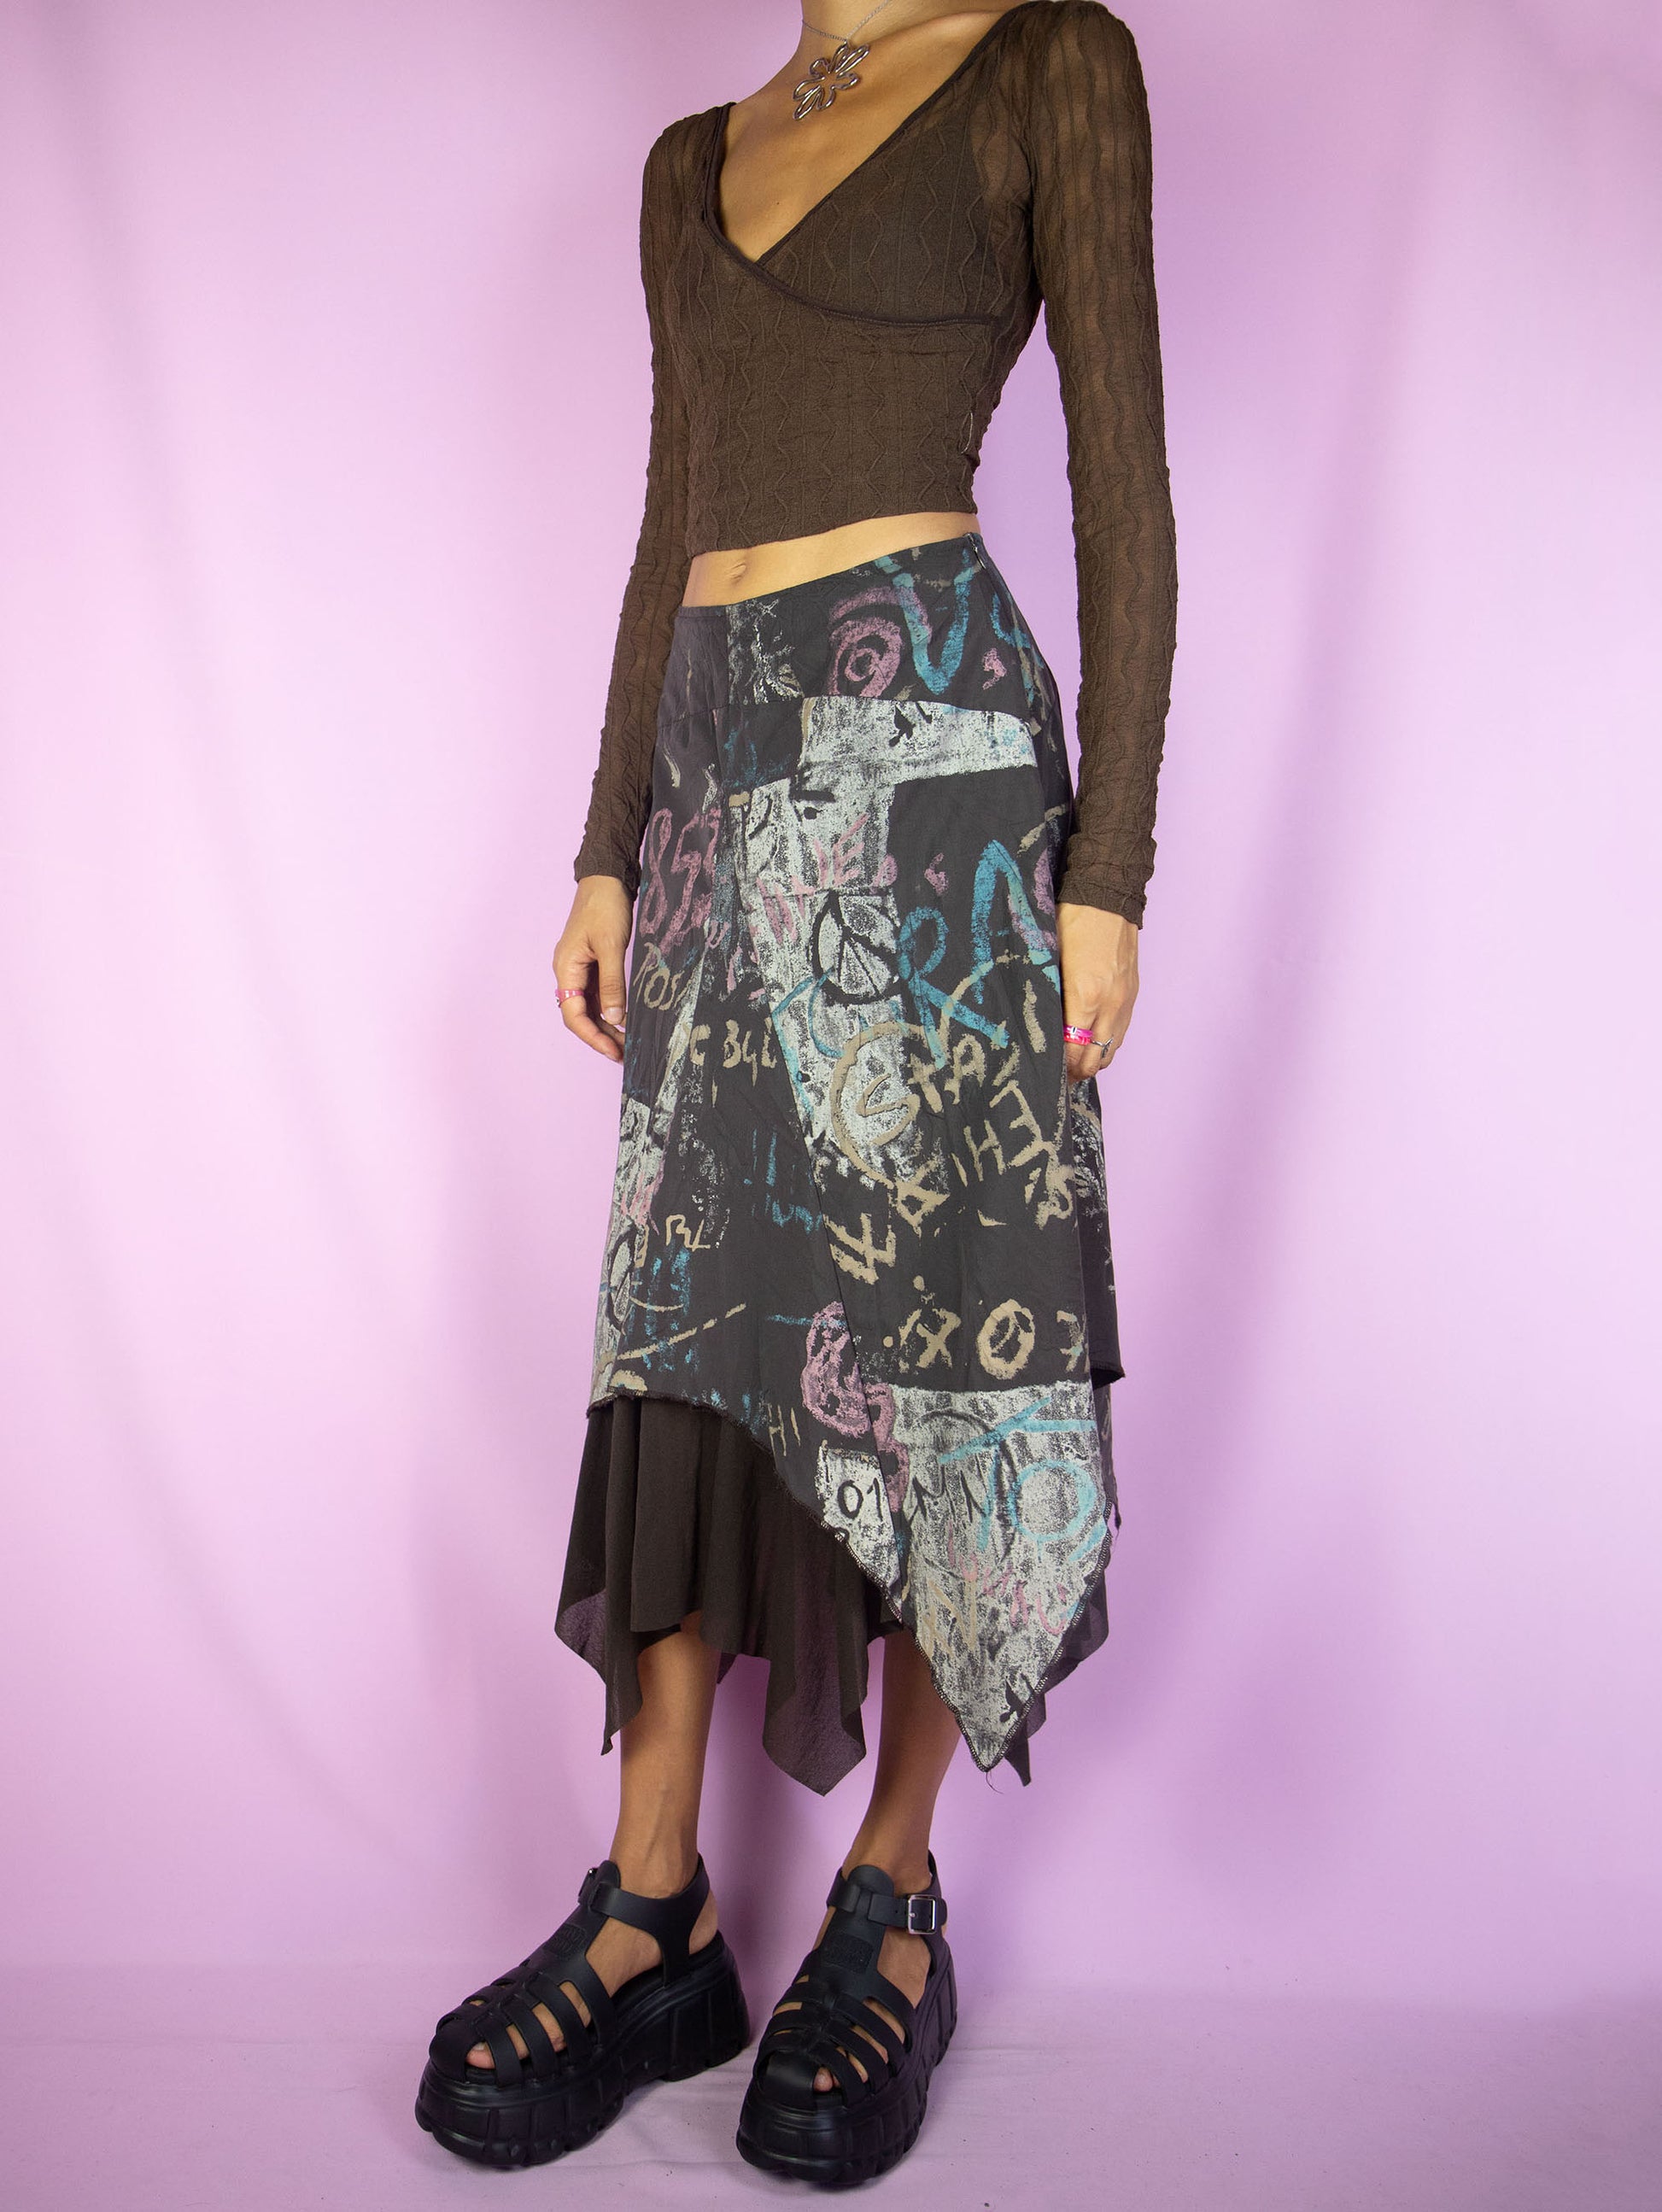 The Y2K Cyber Asymmetric Midi Skirt is a vintage dark brown abstract pointed asymmetrical layered skirt with semi-sheer mesh hem and side zipper closure. Whimsygoth fairy grunge 2000s subversive party midi skirt.